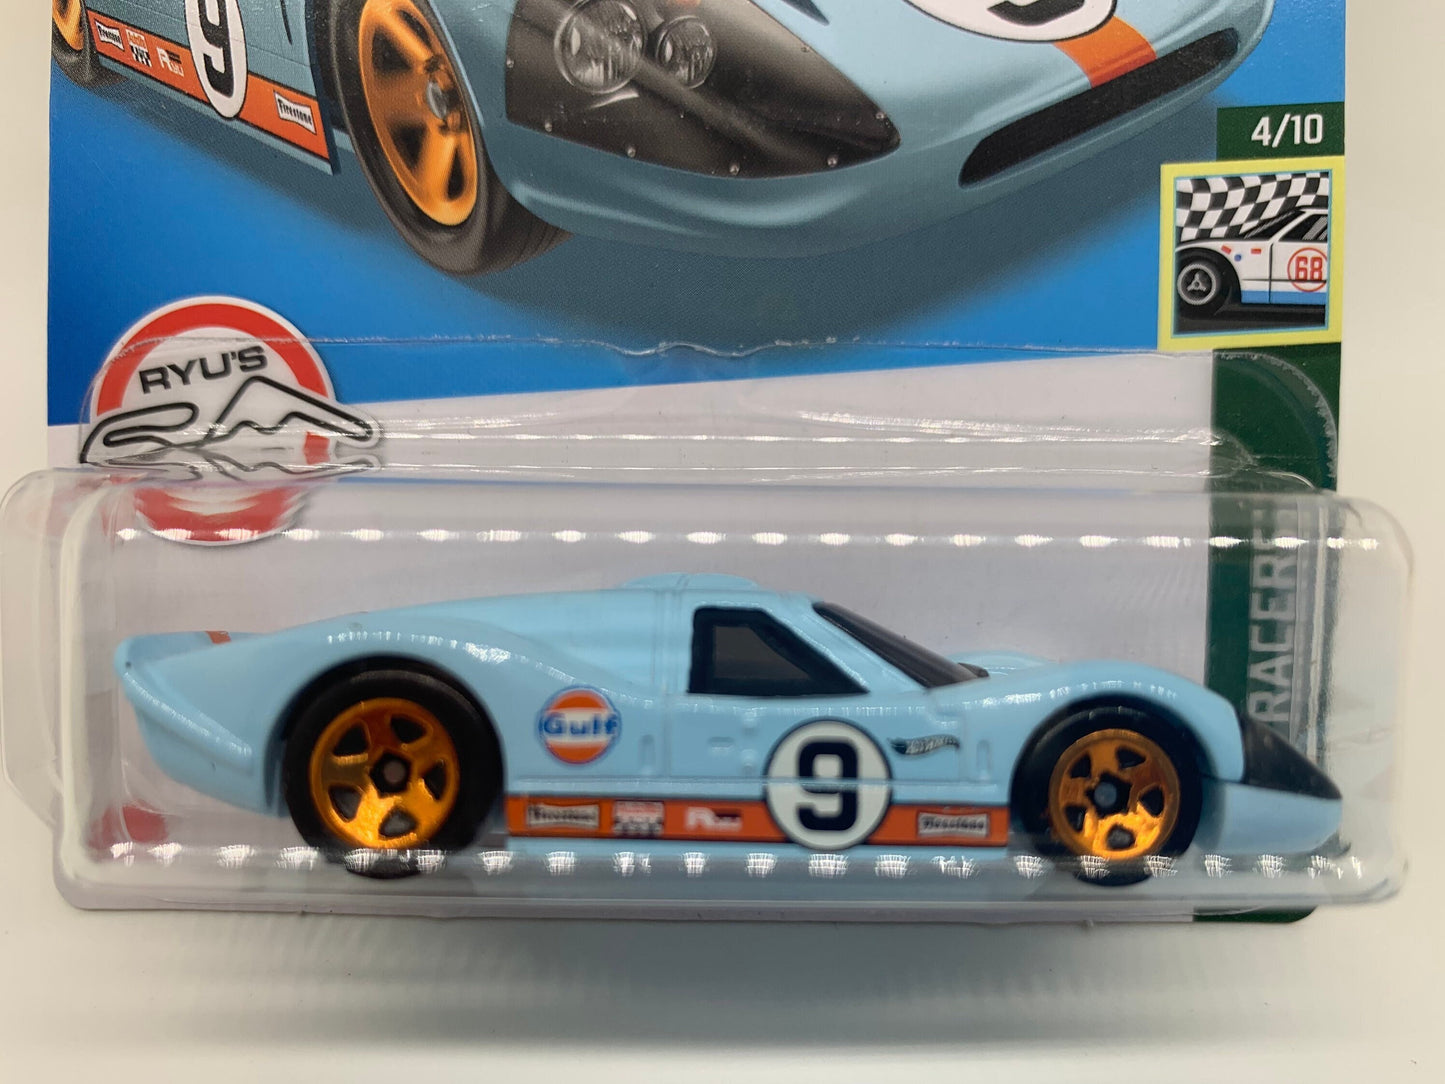 Hot Wheels '67 Ford GT40 Mk IV Gulf Light Blue Retro Racers Perfect Birthday Gift Miniature Collectable Scale Model Toy Car